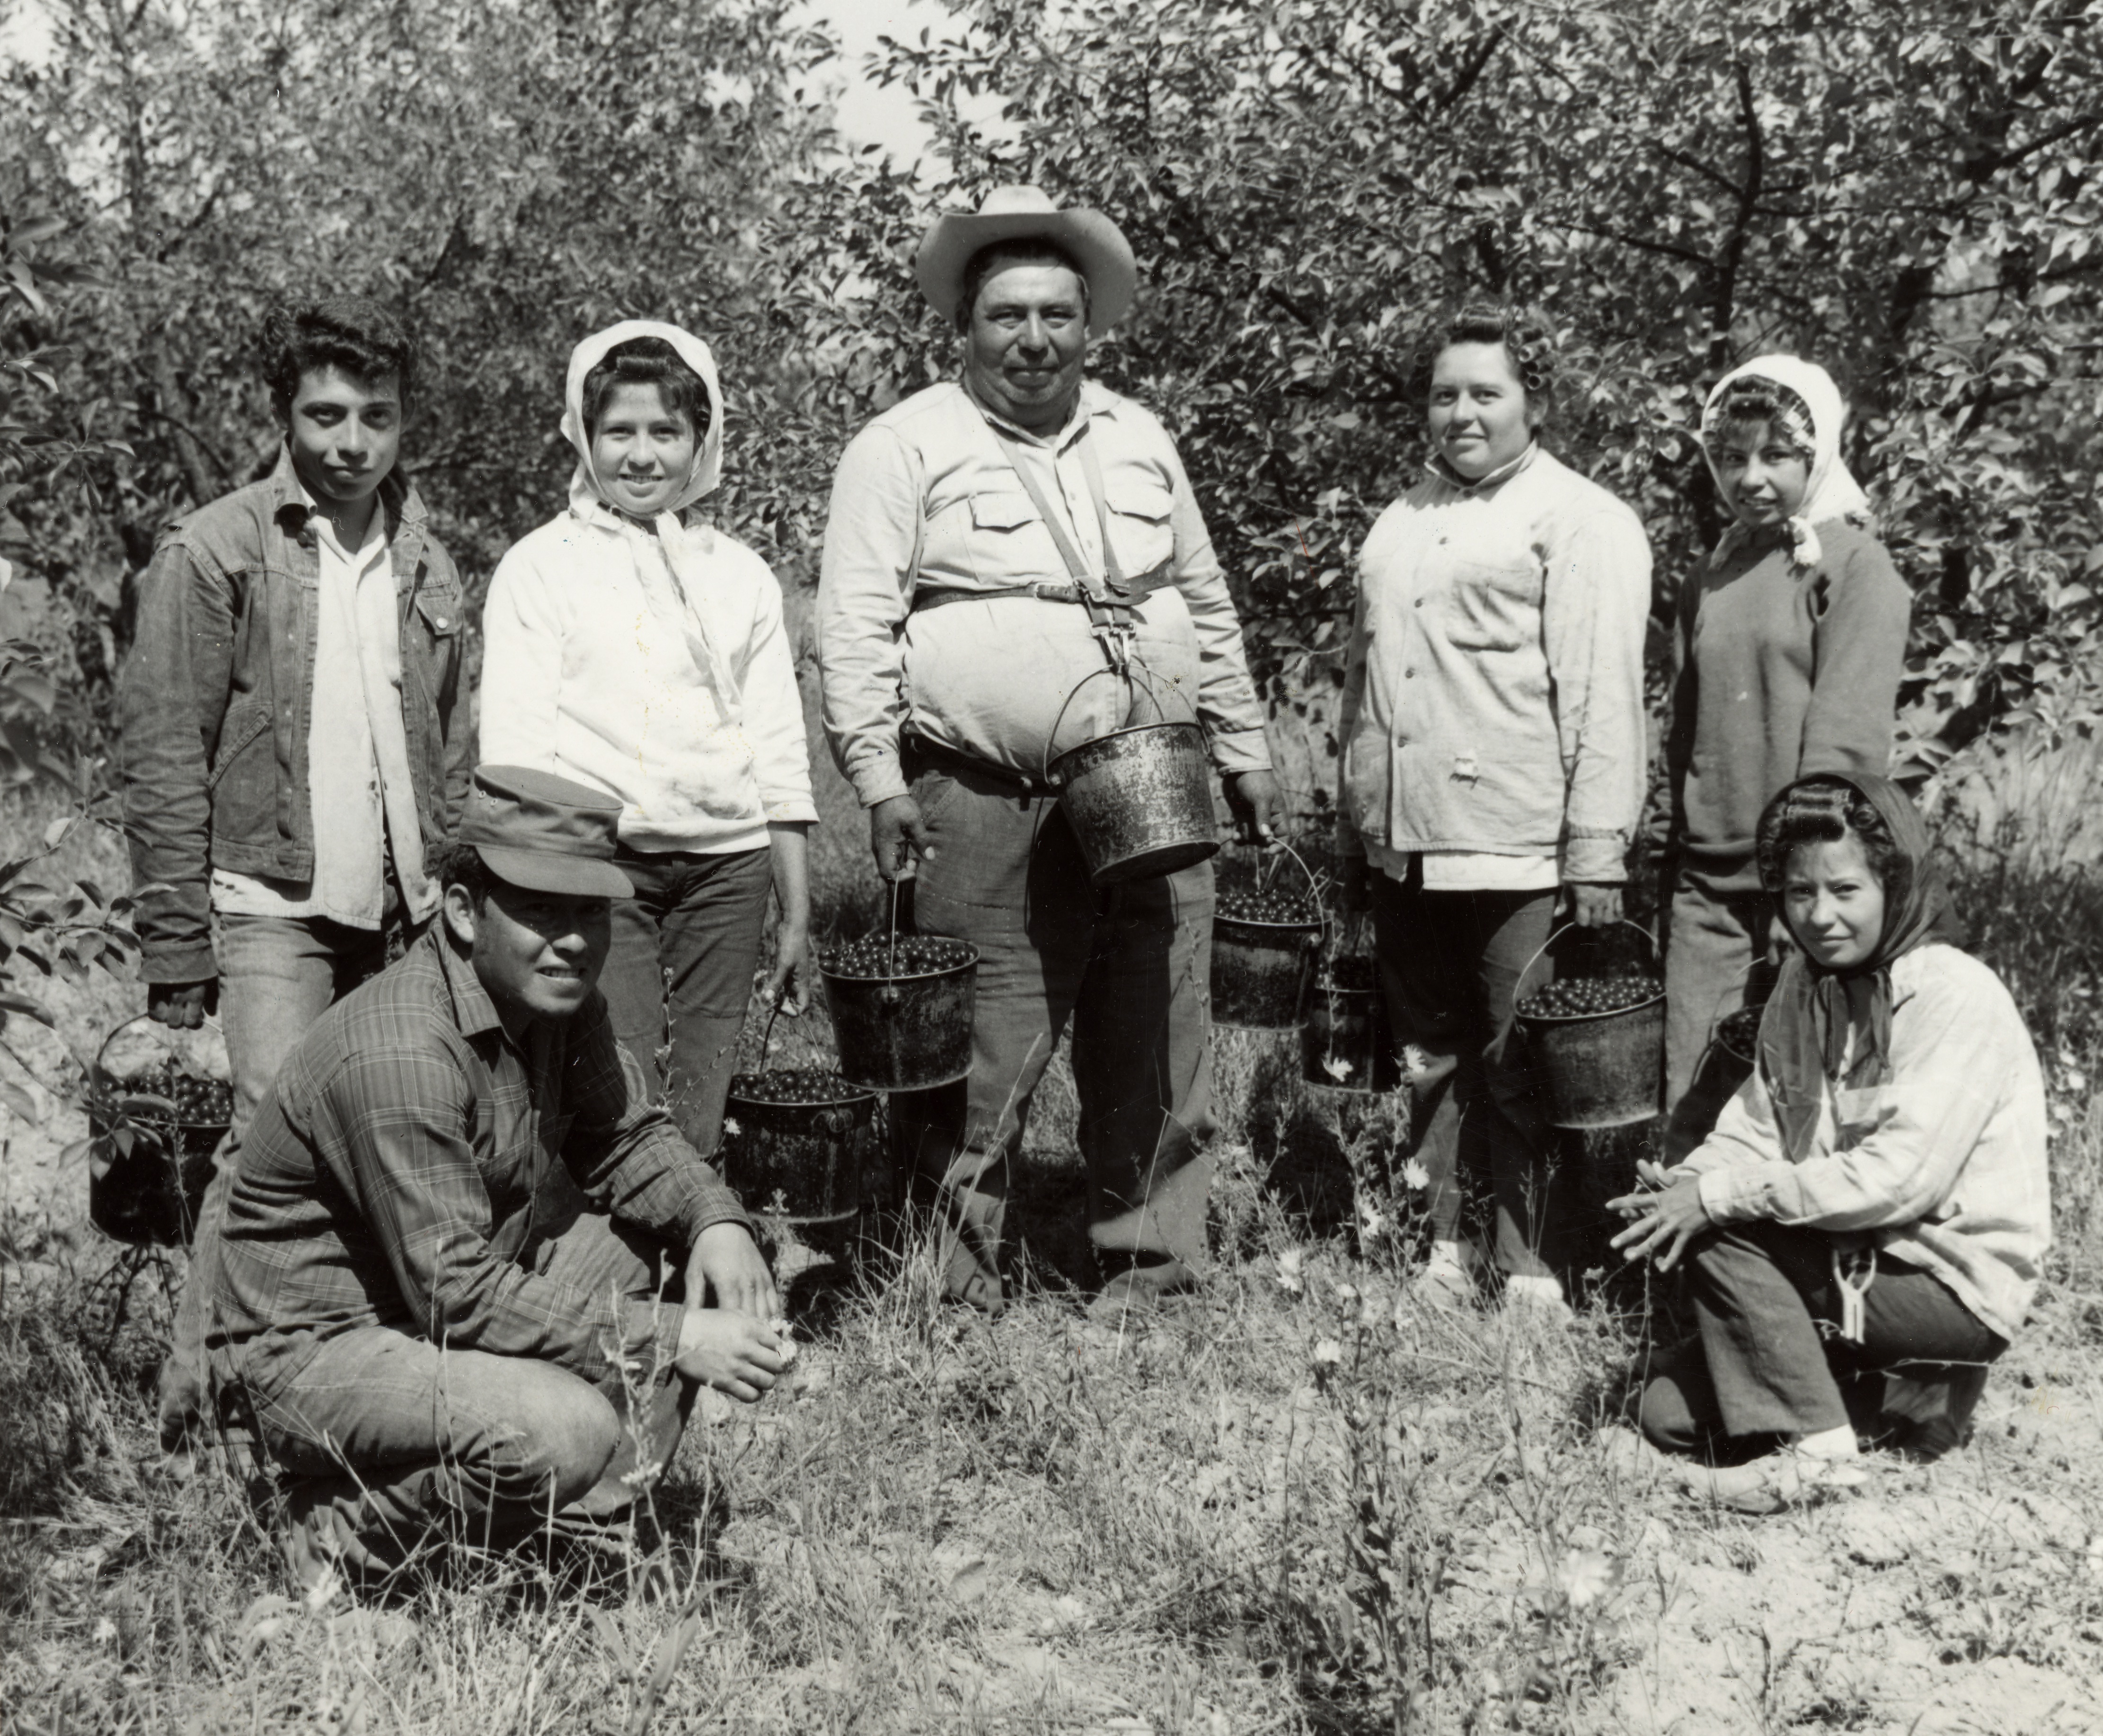 A migrant worker family in a Door County cherry orchard. Image courtesy of the Wisconsin Historical Society. Image ID: 48938.